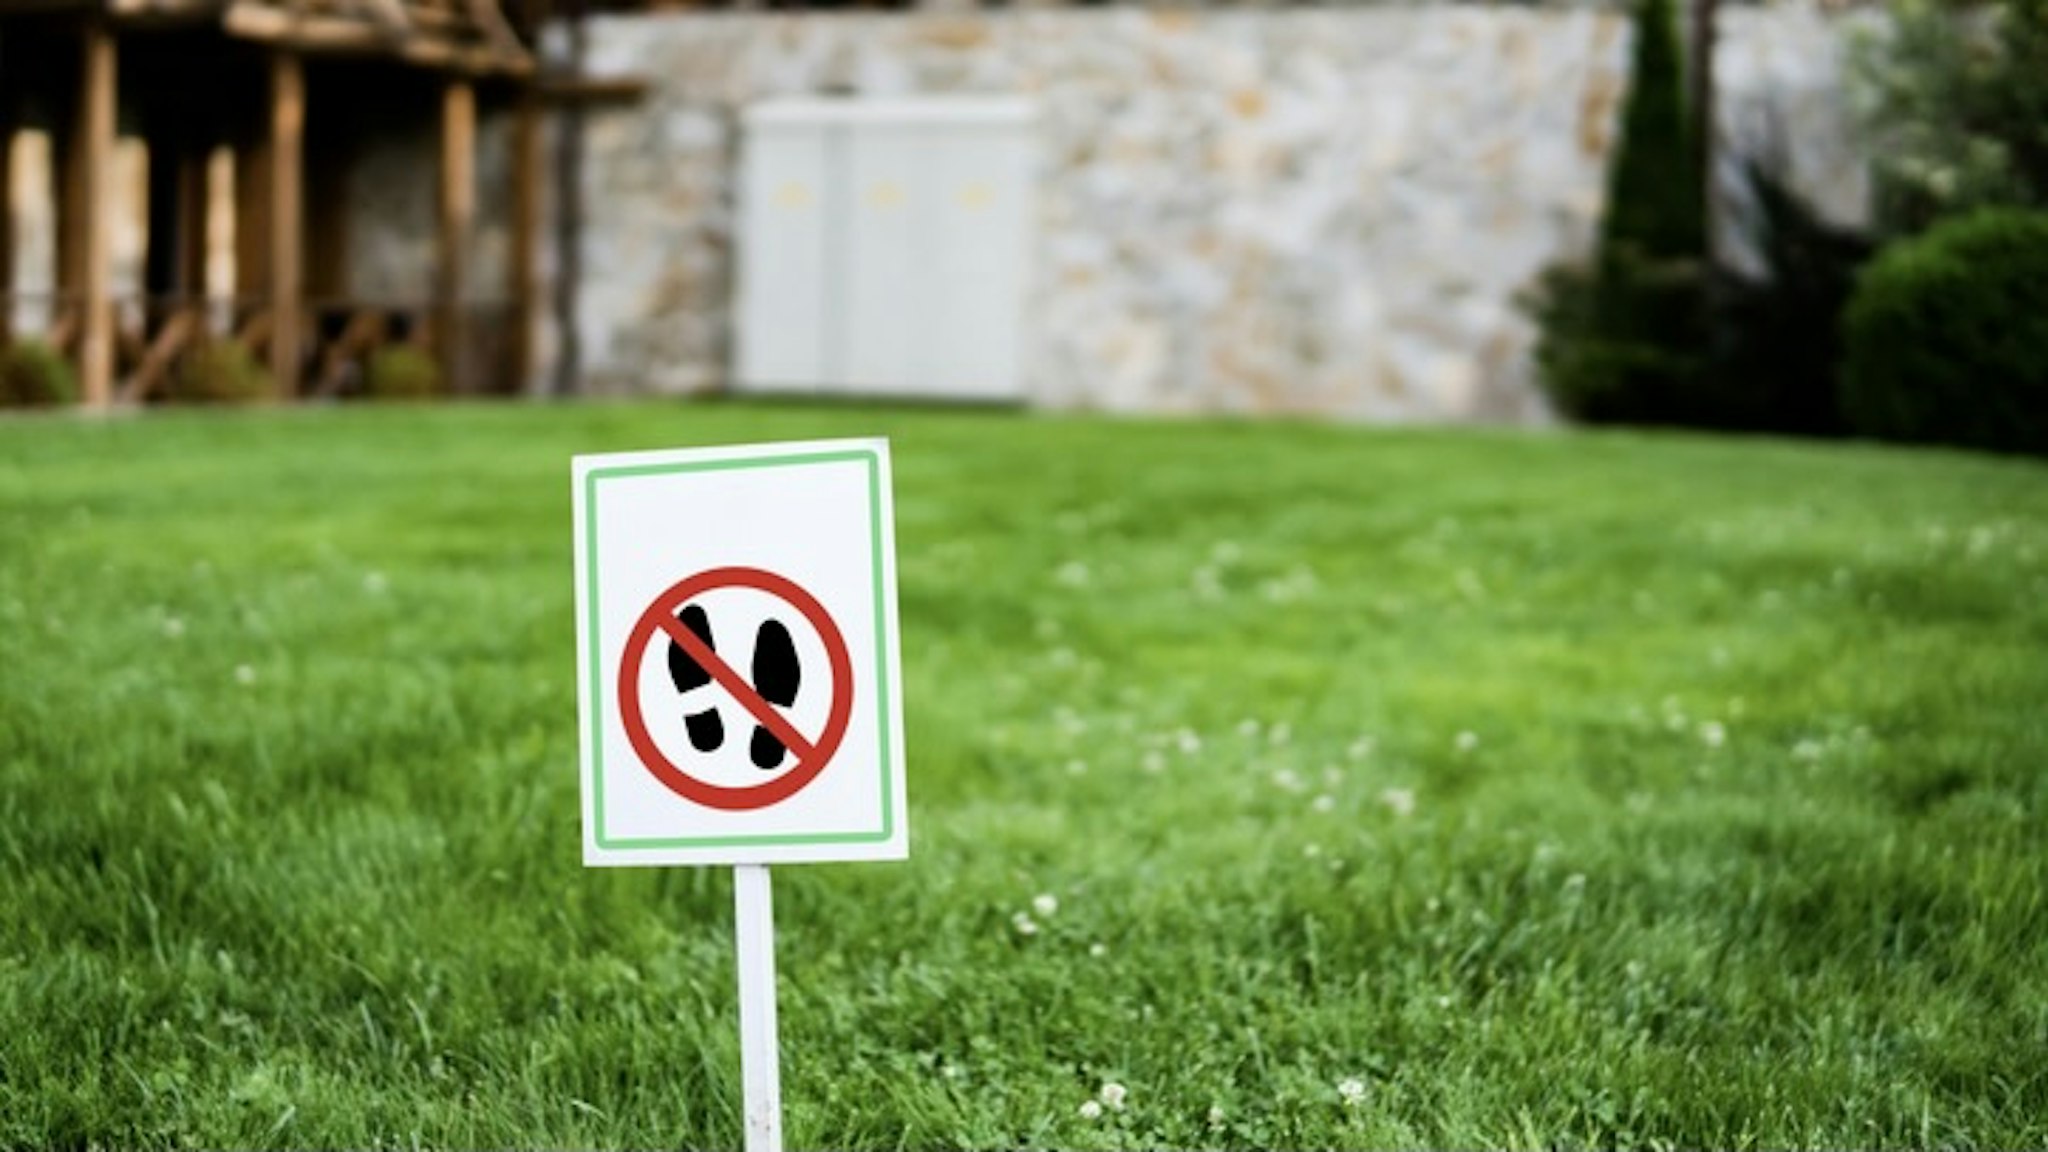 No Walking Sign in a Park Grass Lawn - stock photo No Walking Sign in a Park Grass Lawn